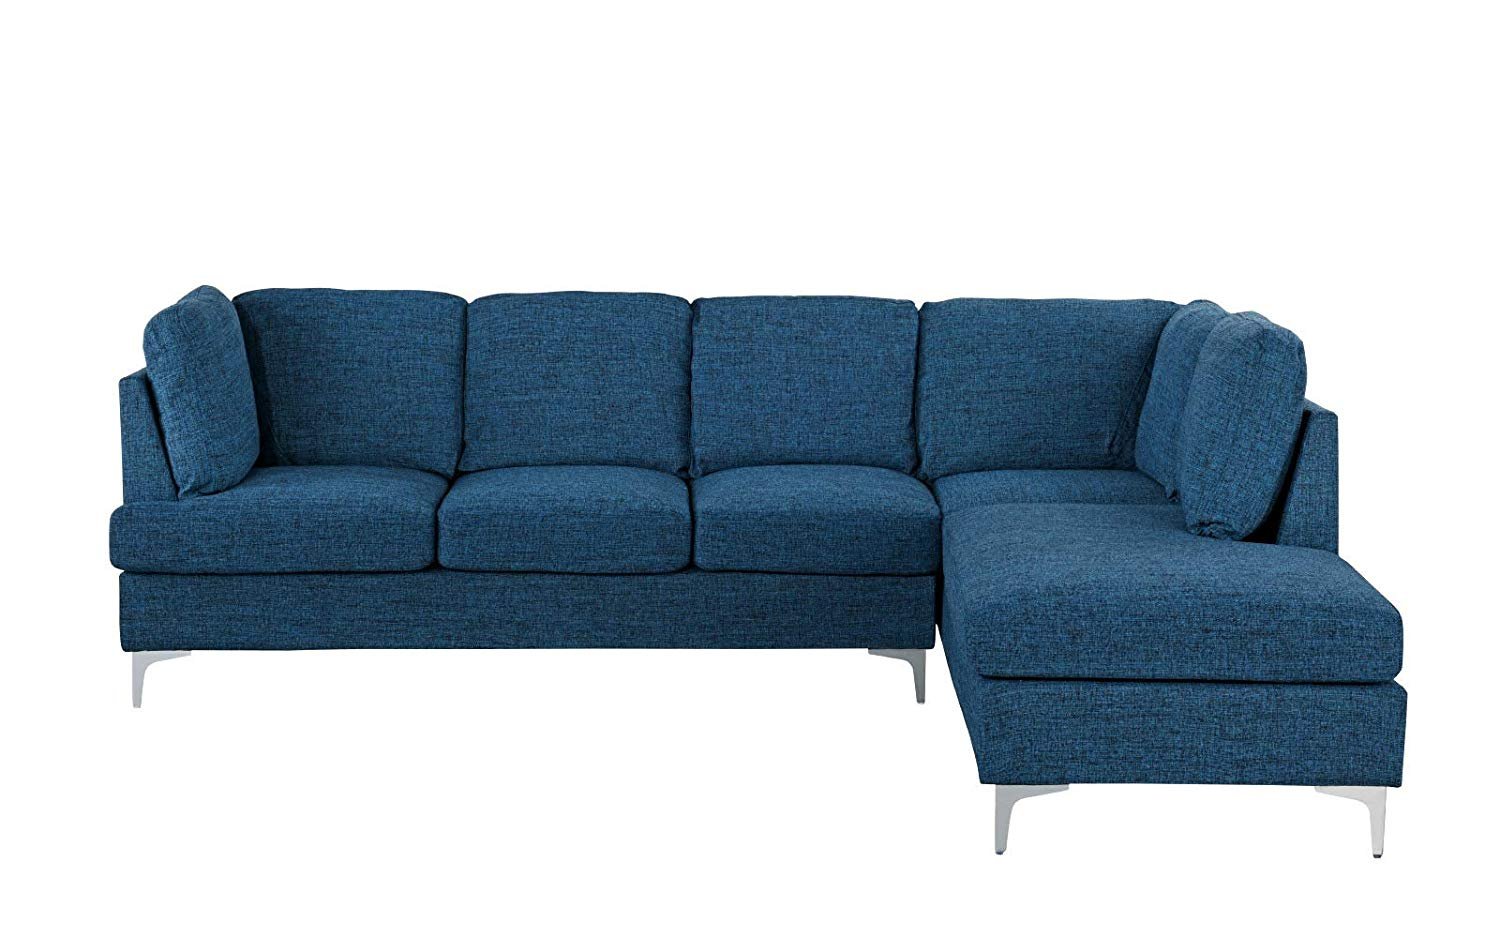 l couch blue recliners sofa bed